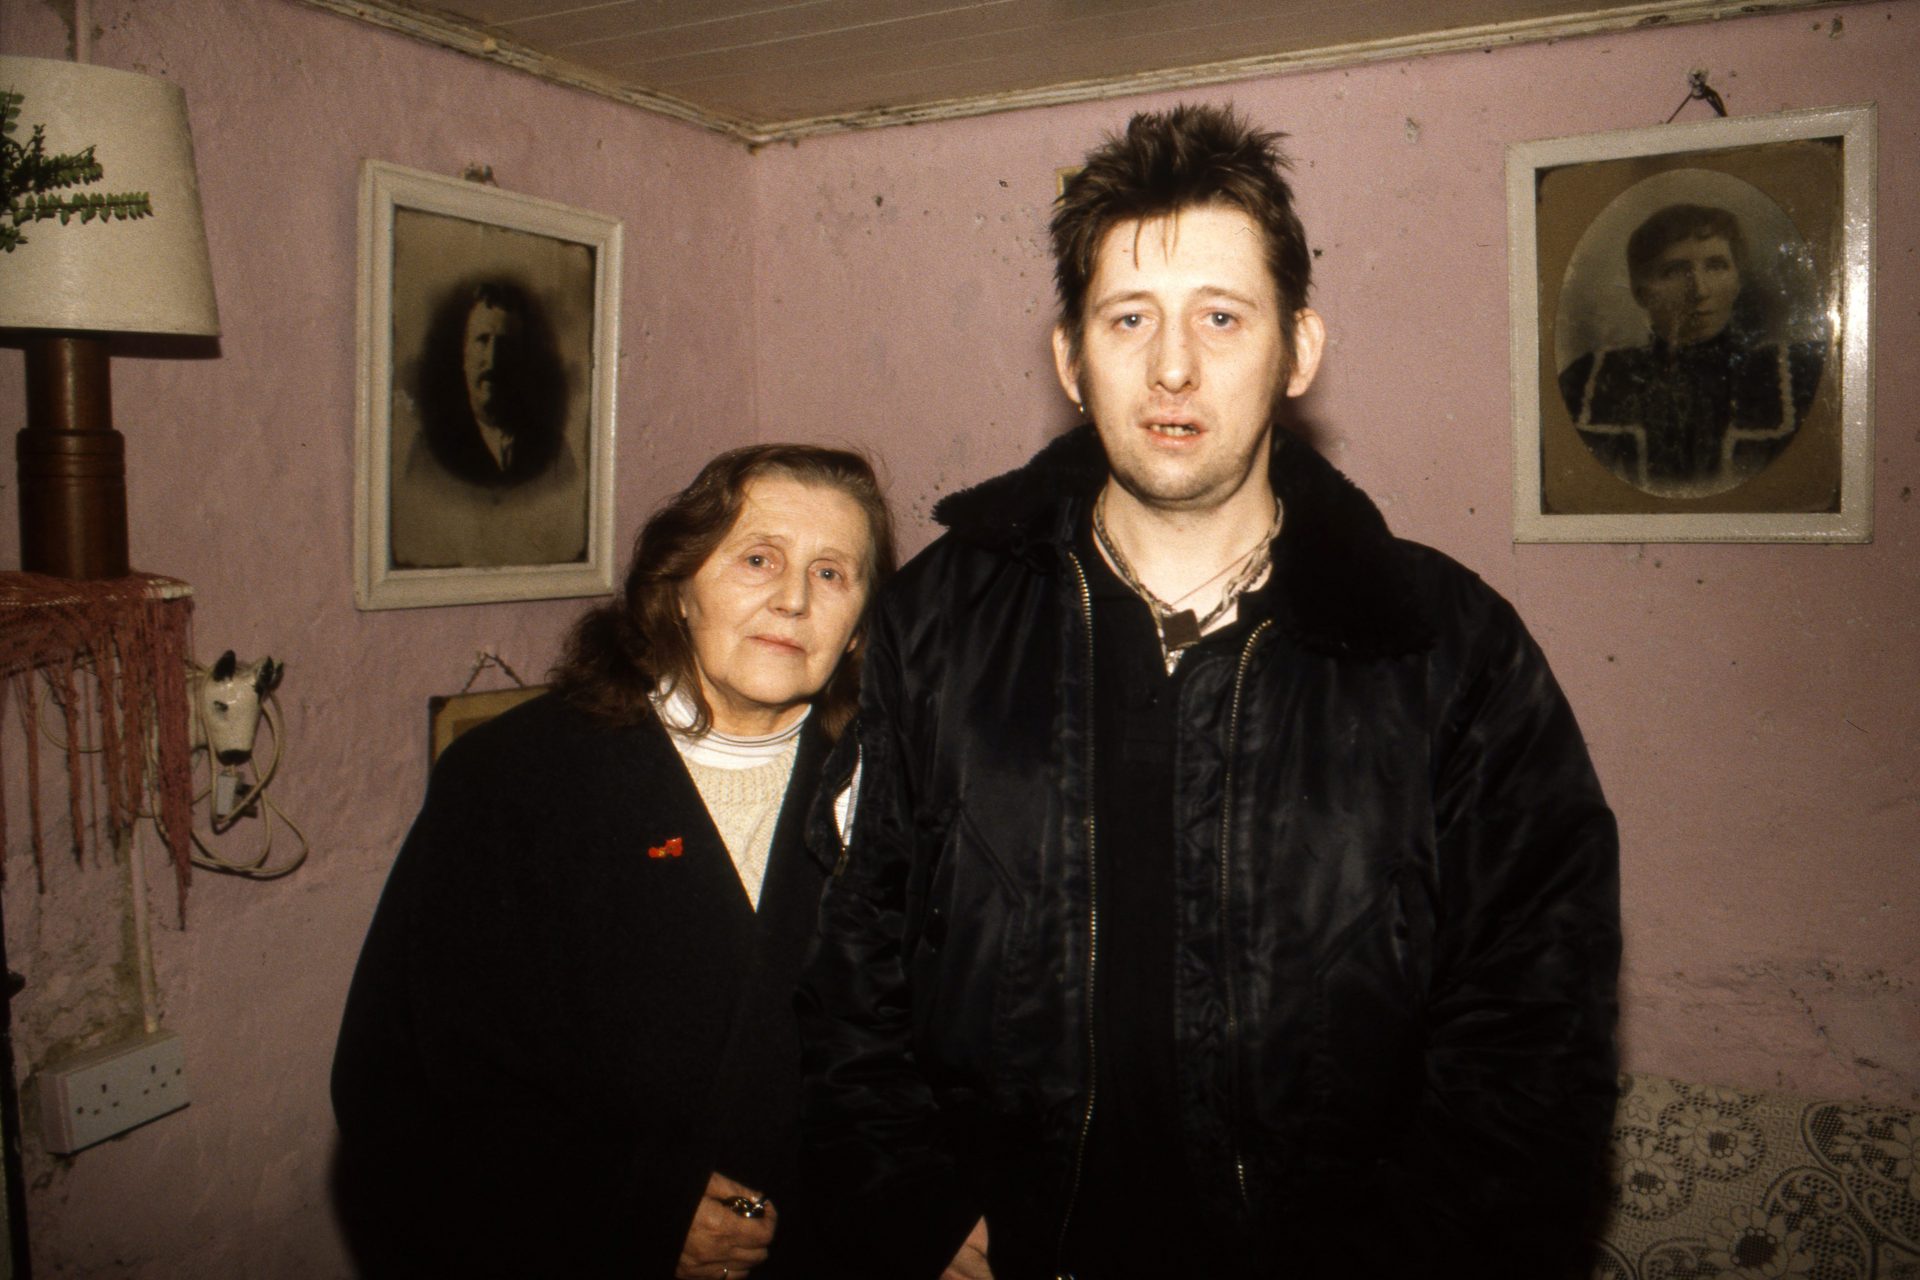 The early life of Shane MacGowan